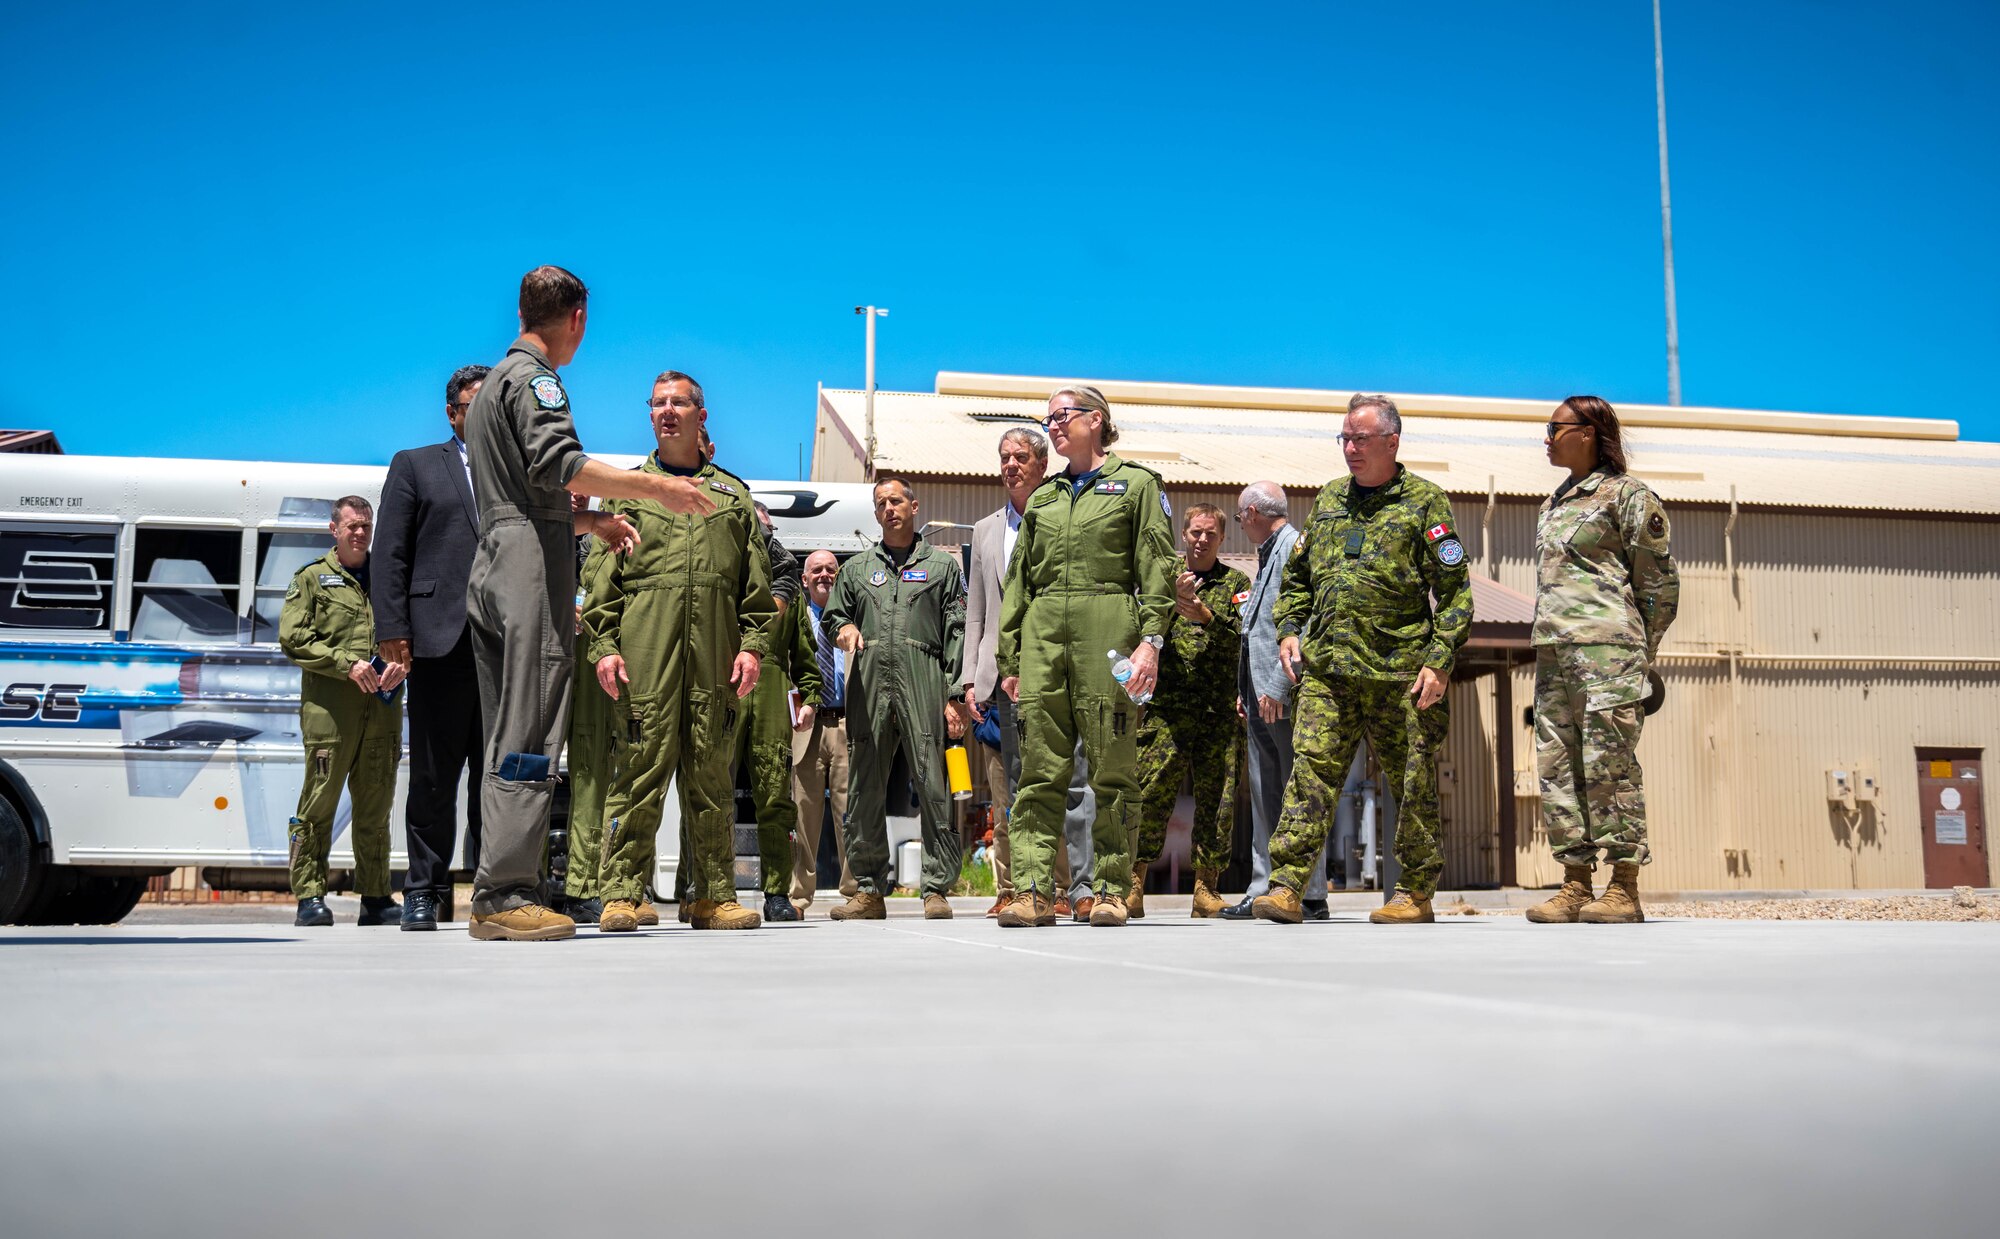 Royal Canadian Air Force Leadership, including Lt. Gen. Eric Kenny, RCAF commander, arrive to the 308th Fighter Squadron.